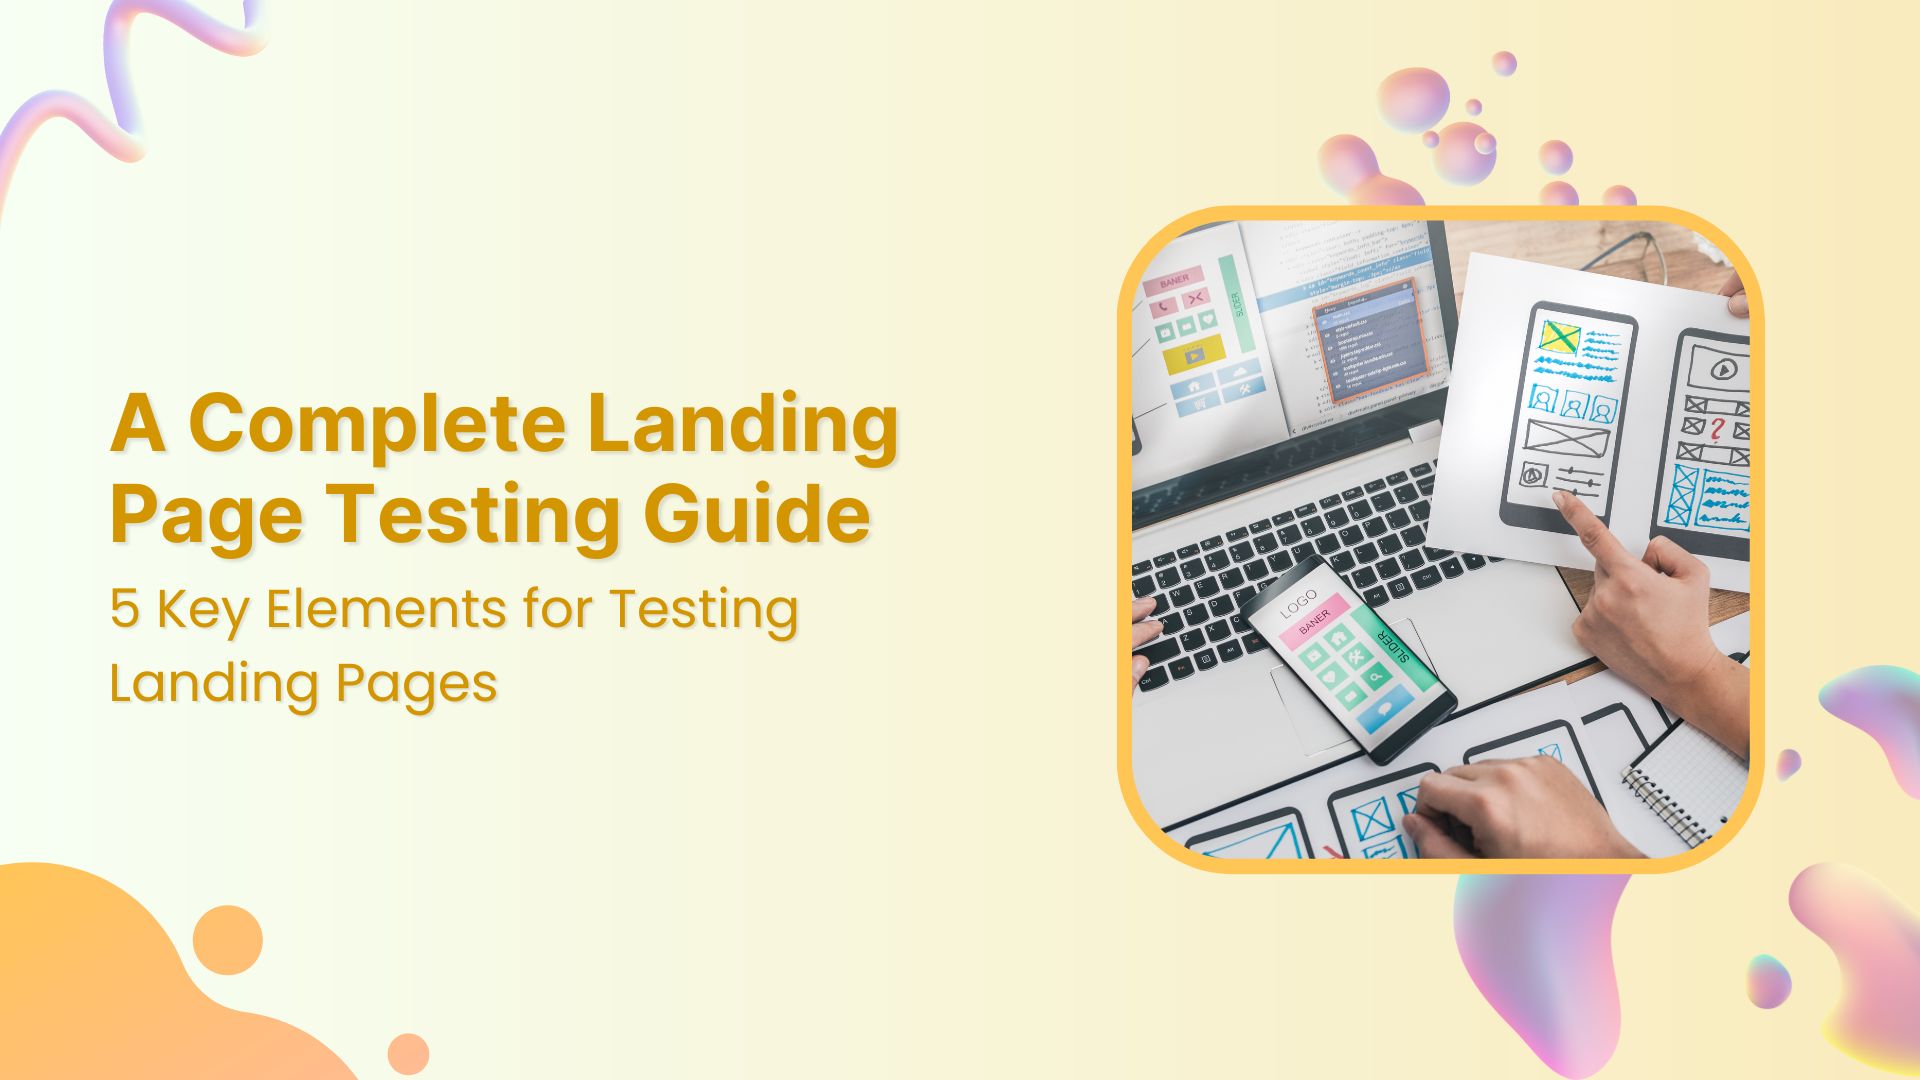 A Complete Landing Page Testing Guide